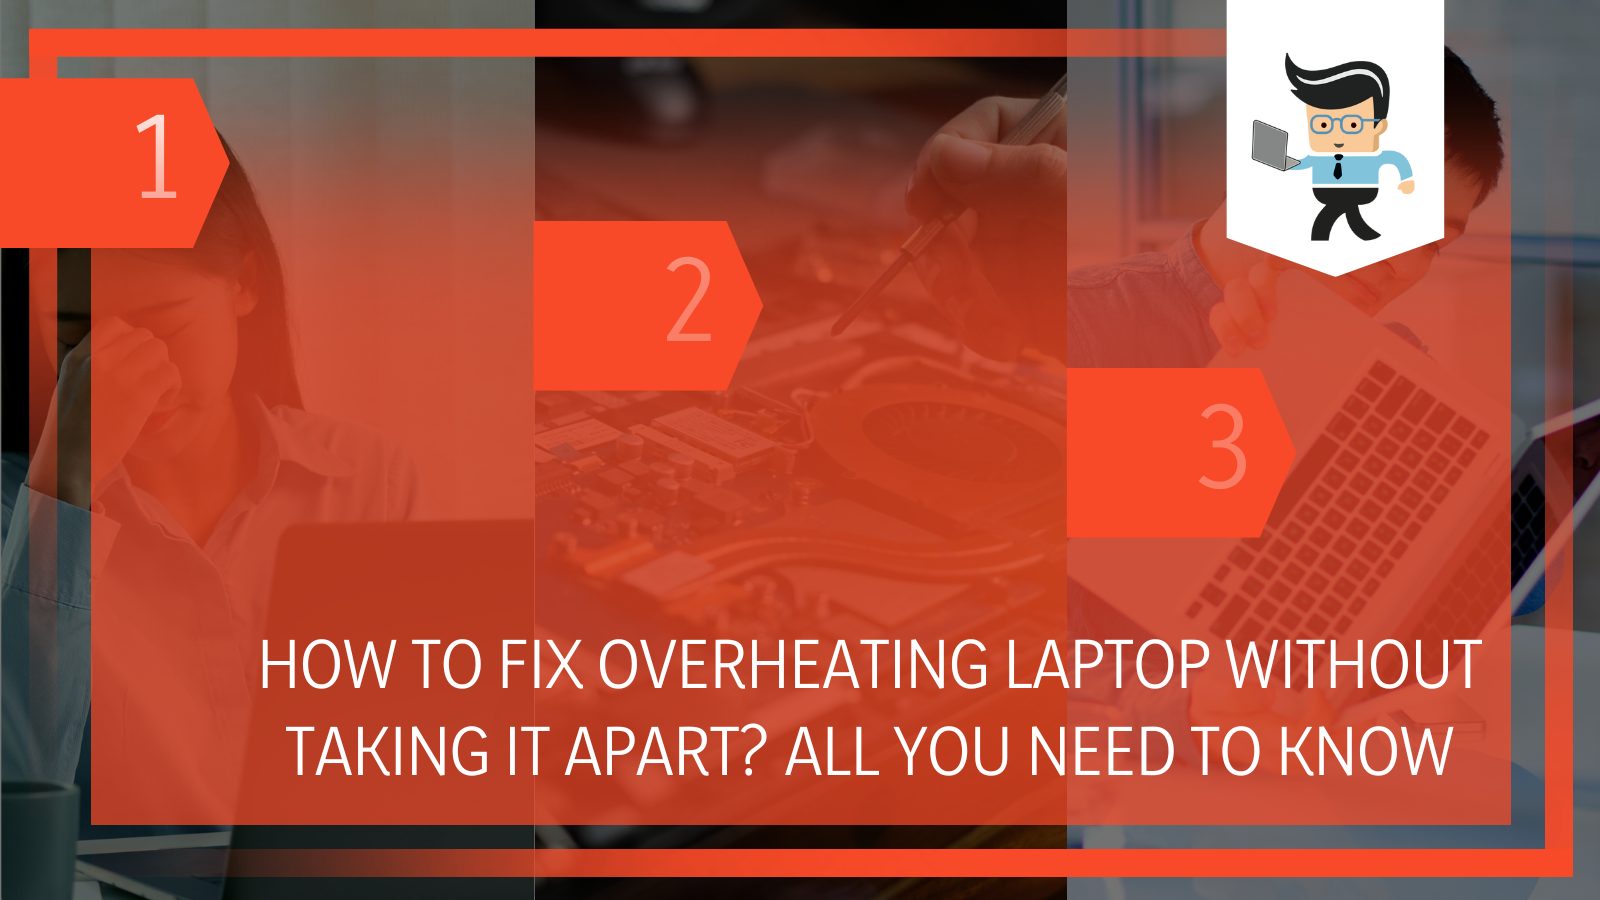 Fix Overheating Laptop Without Taking It Apart